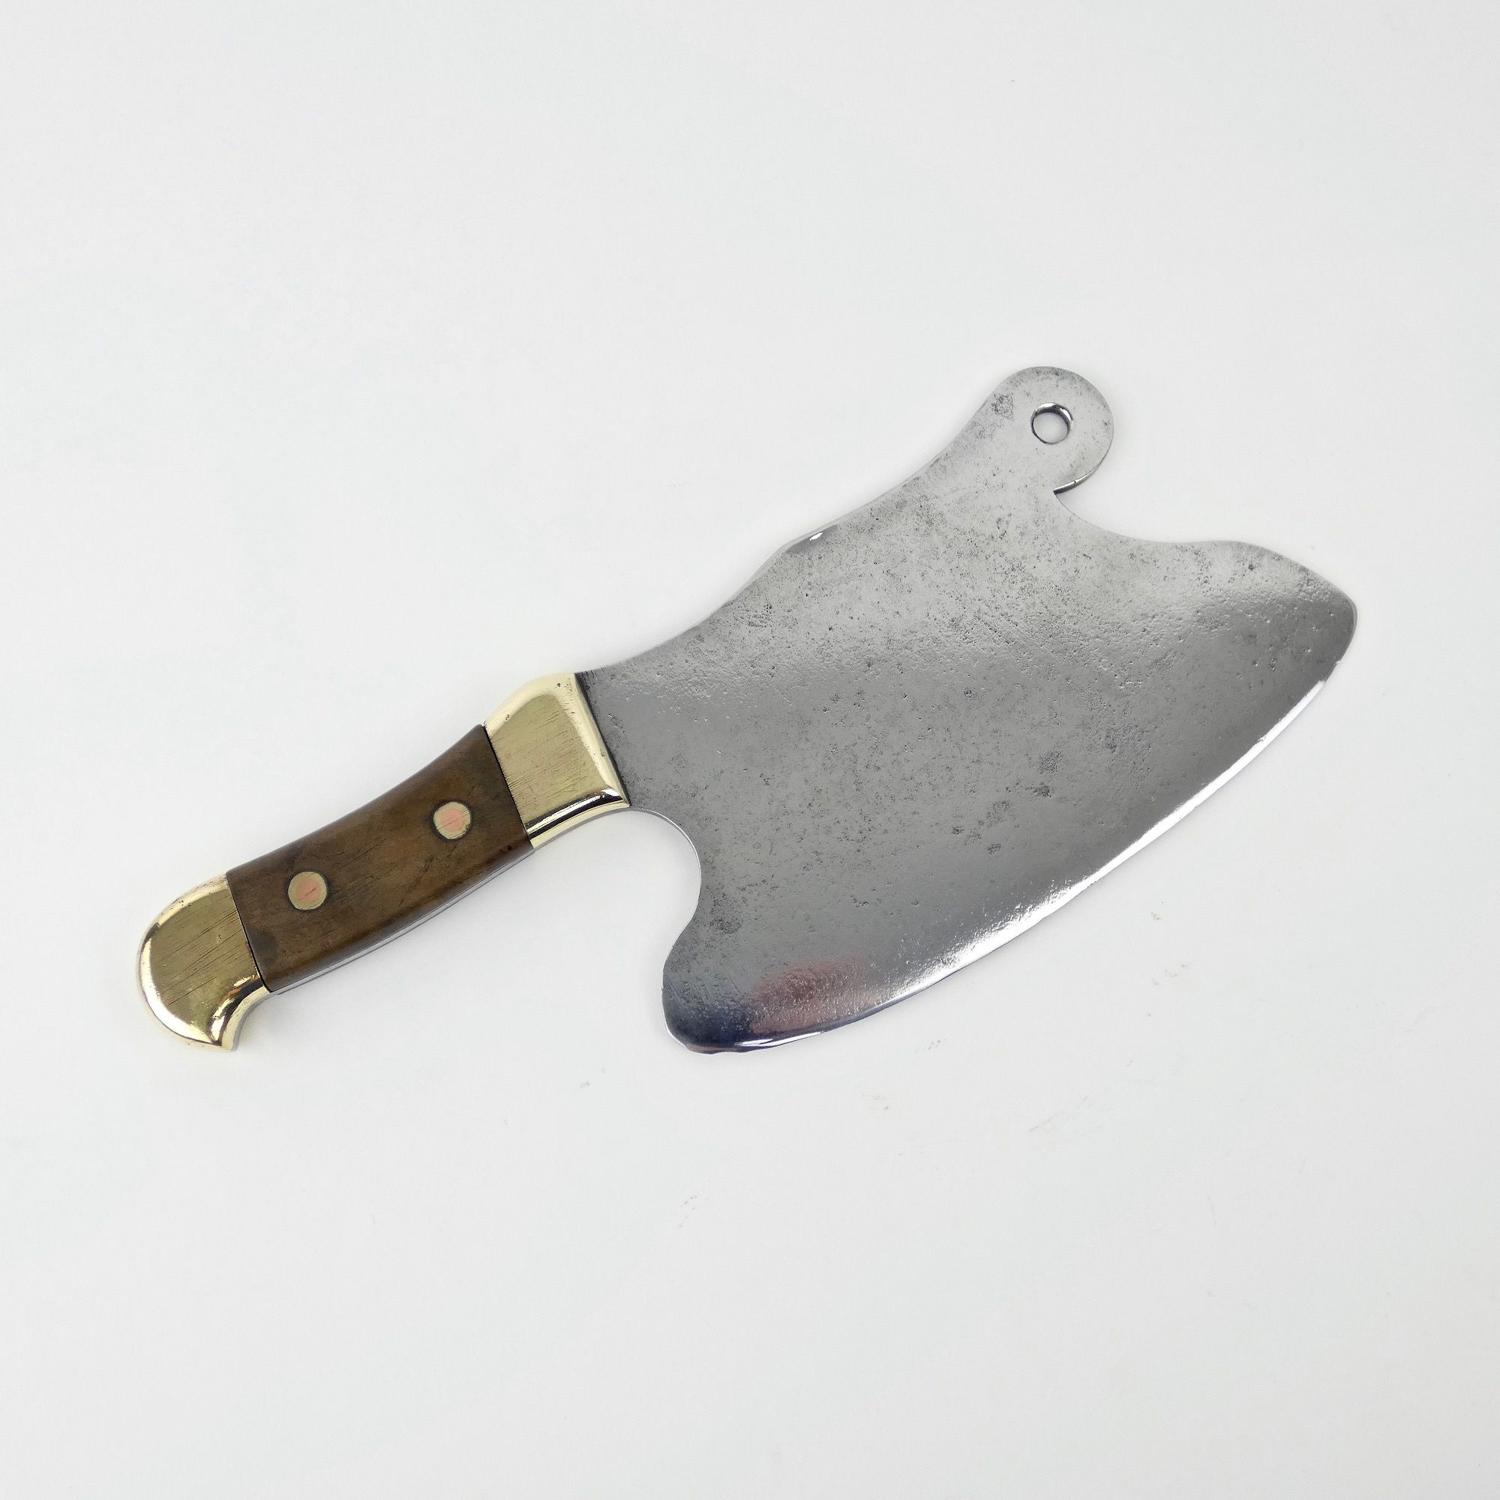 Steel cleaver with horn handle